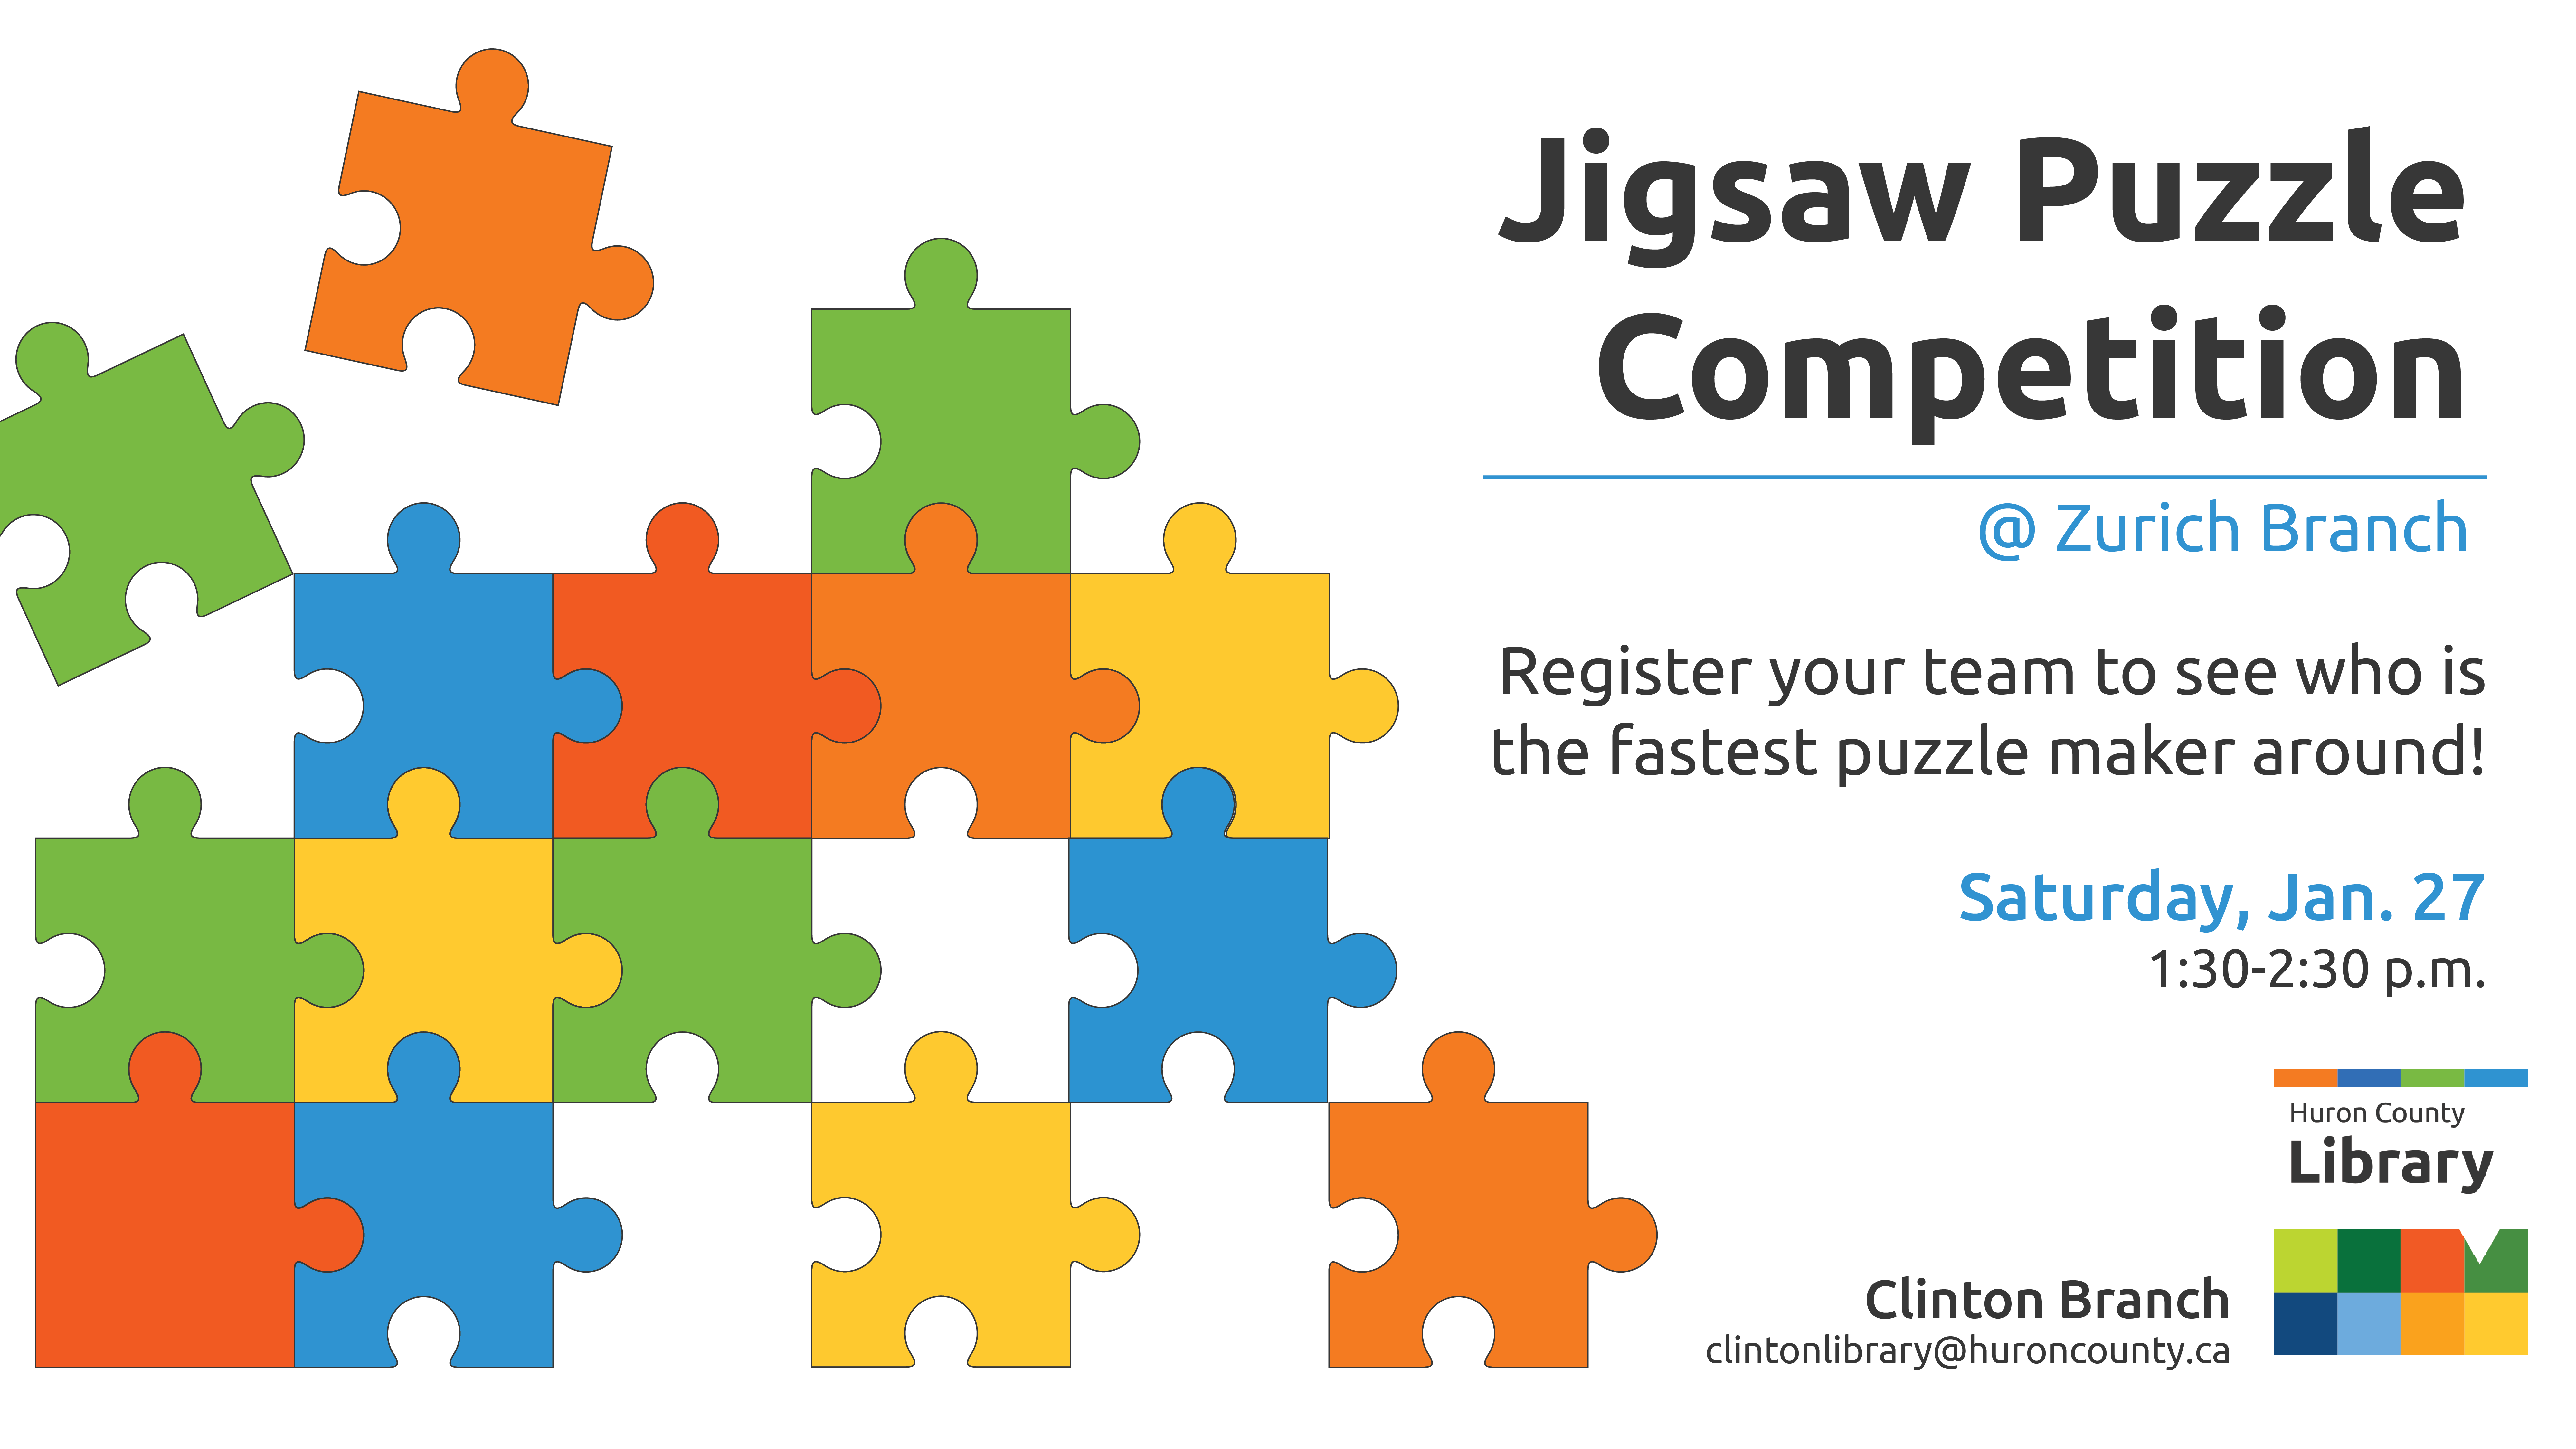 Illustration of puzzle pieces with text promoting puzzle competition at Zurich branch